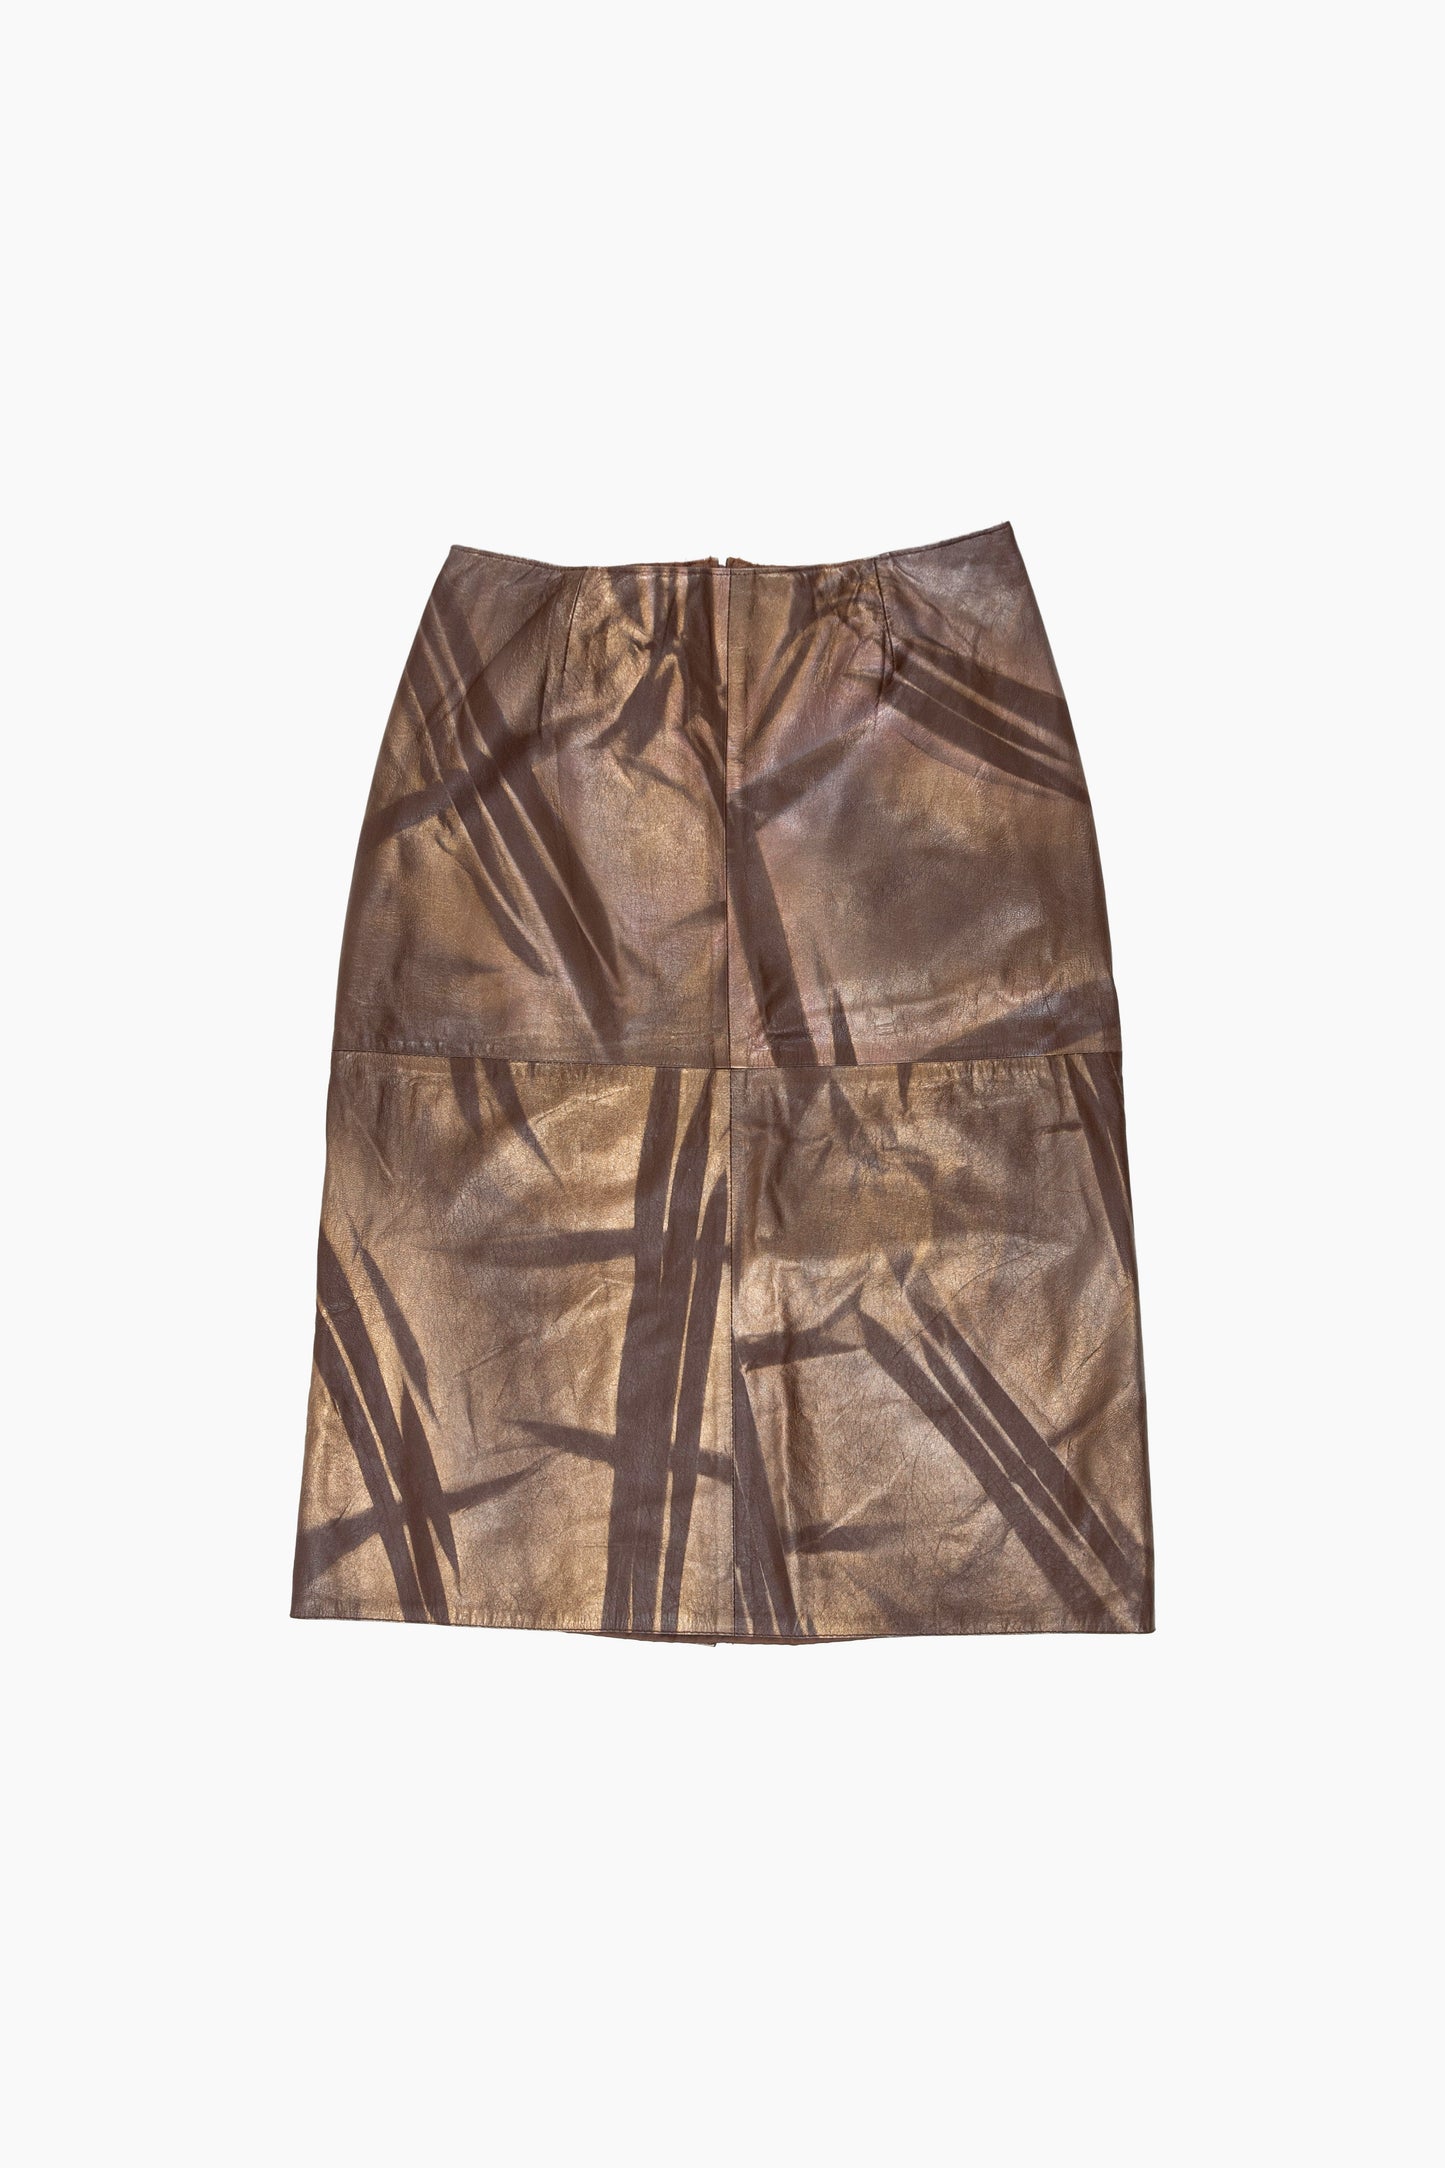 Gold & Brown Leather Skirt